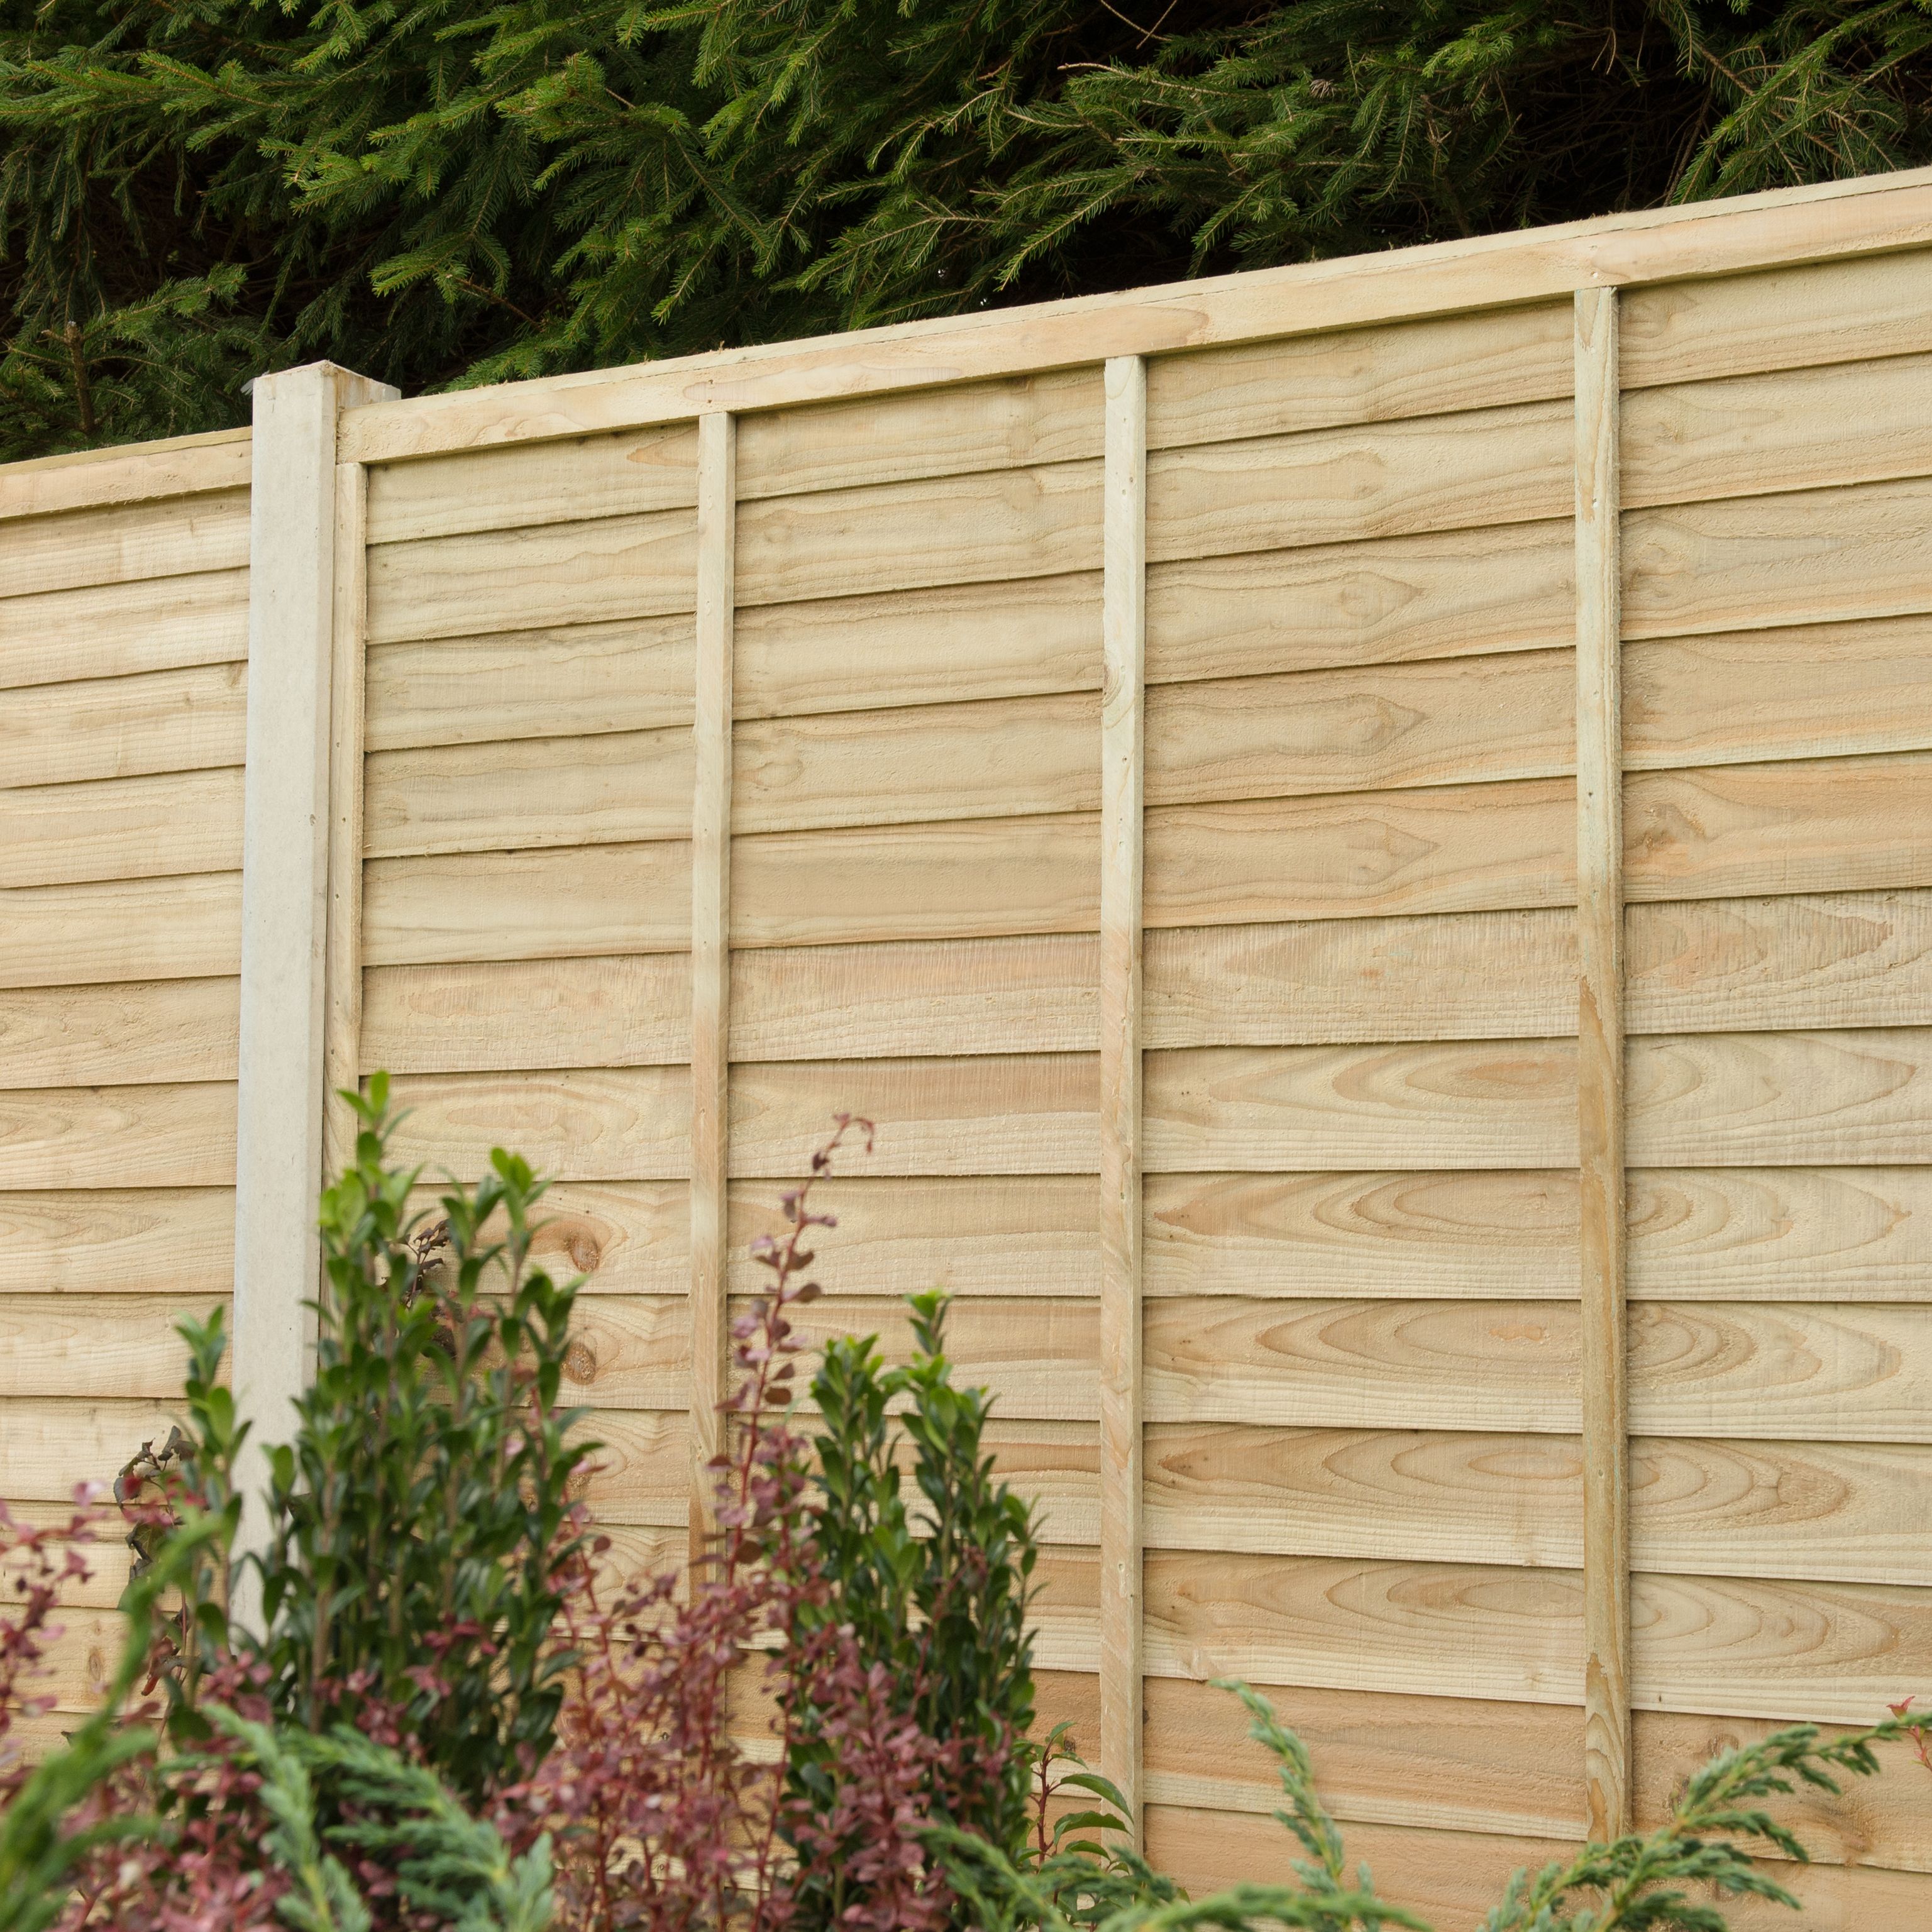 Premier Overlap Pressure treated 6ft Green Wooden Fence panel (W)1.83m (H)1.83m, Pack of 3